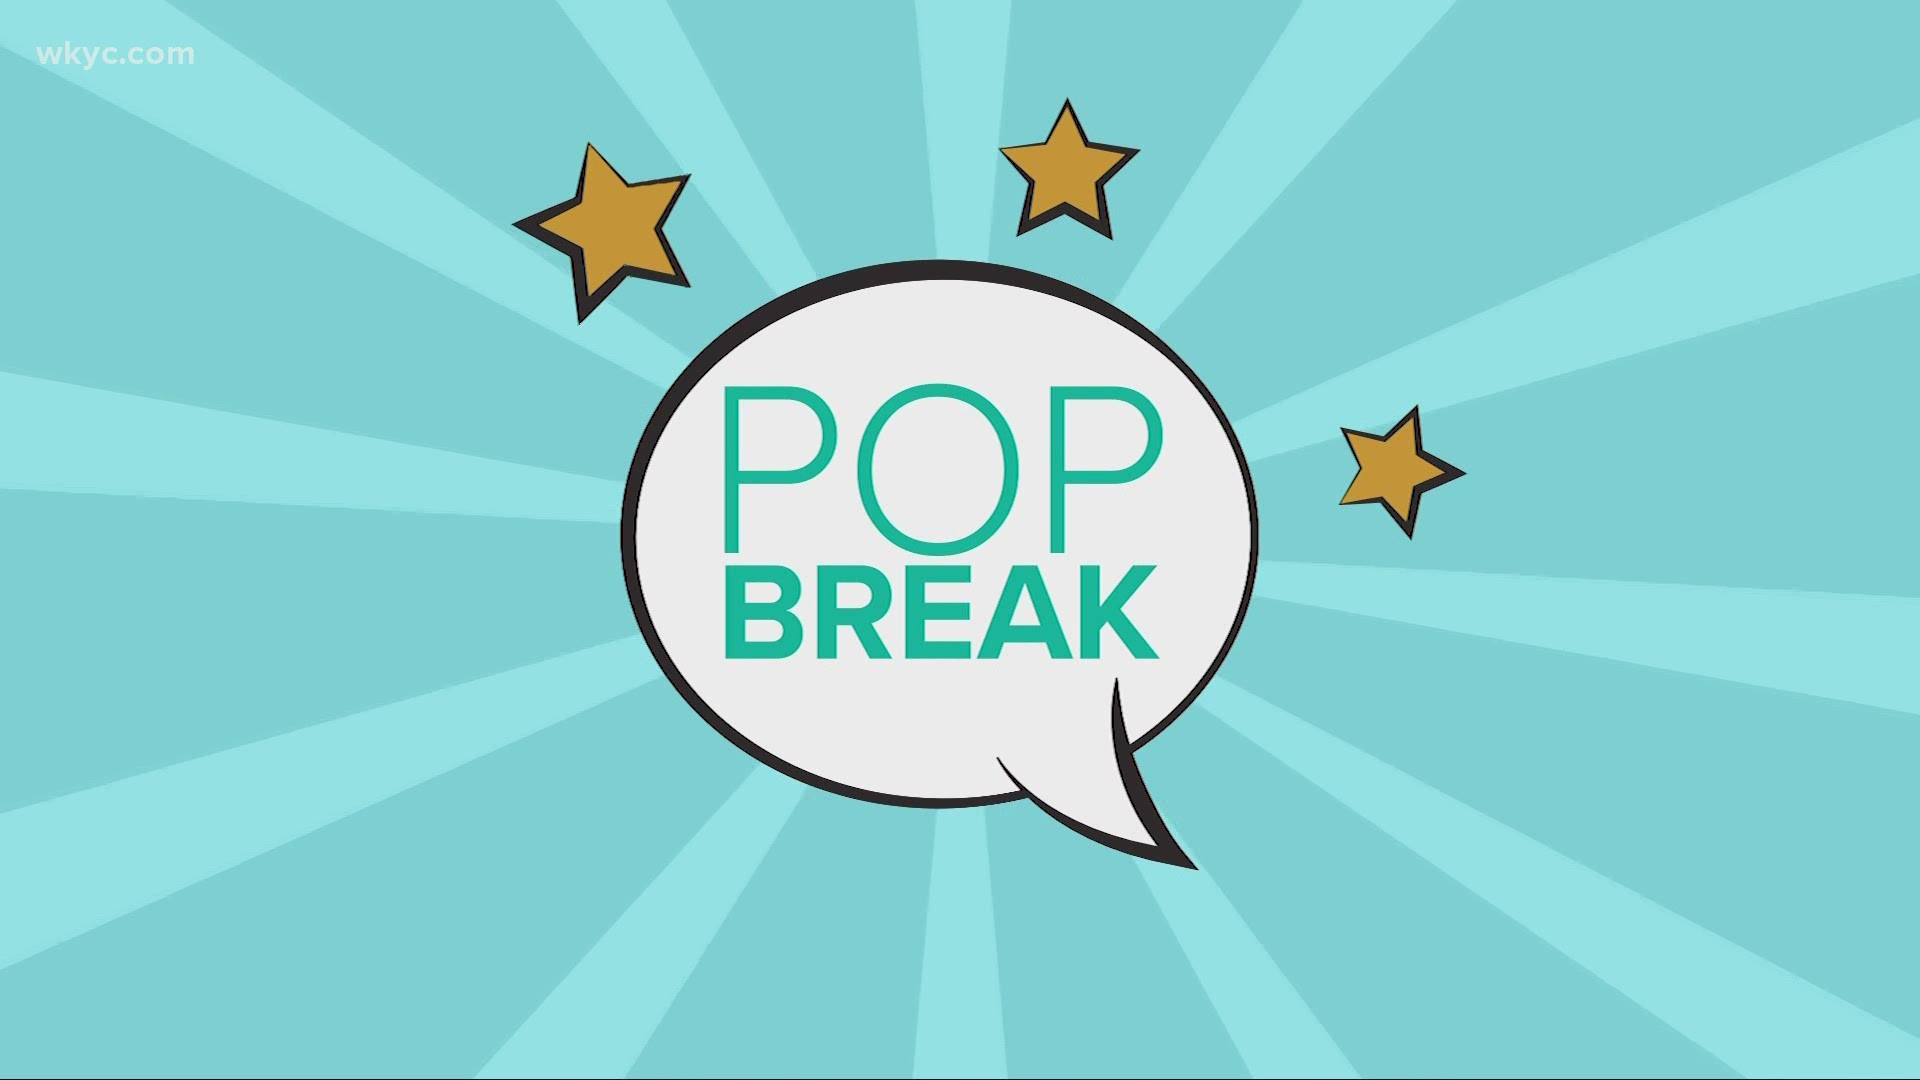 3News digital anchor Stephanie Haney has all the Hollywood news in Pop Break.  Keanu Reeves has another 'John Wick' moving coming out.